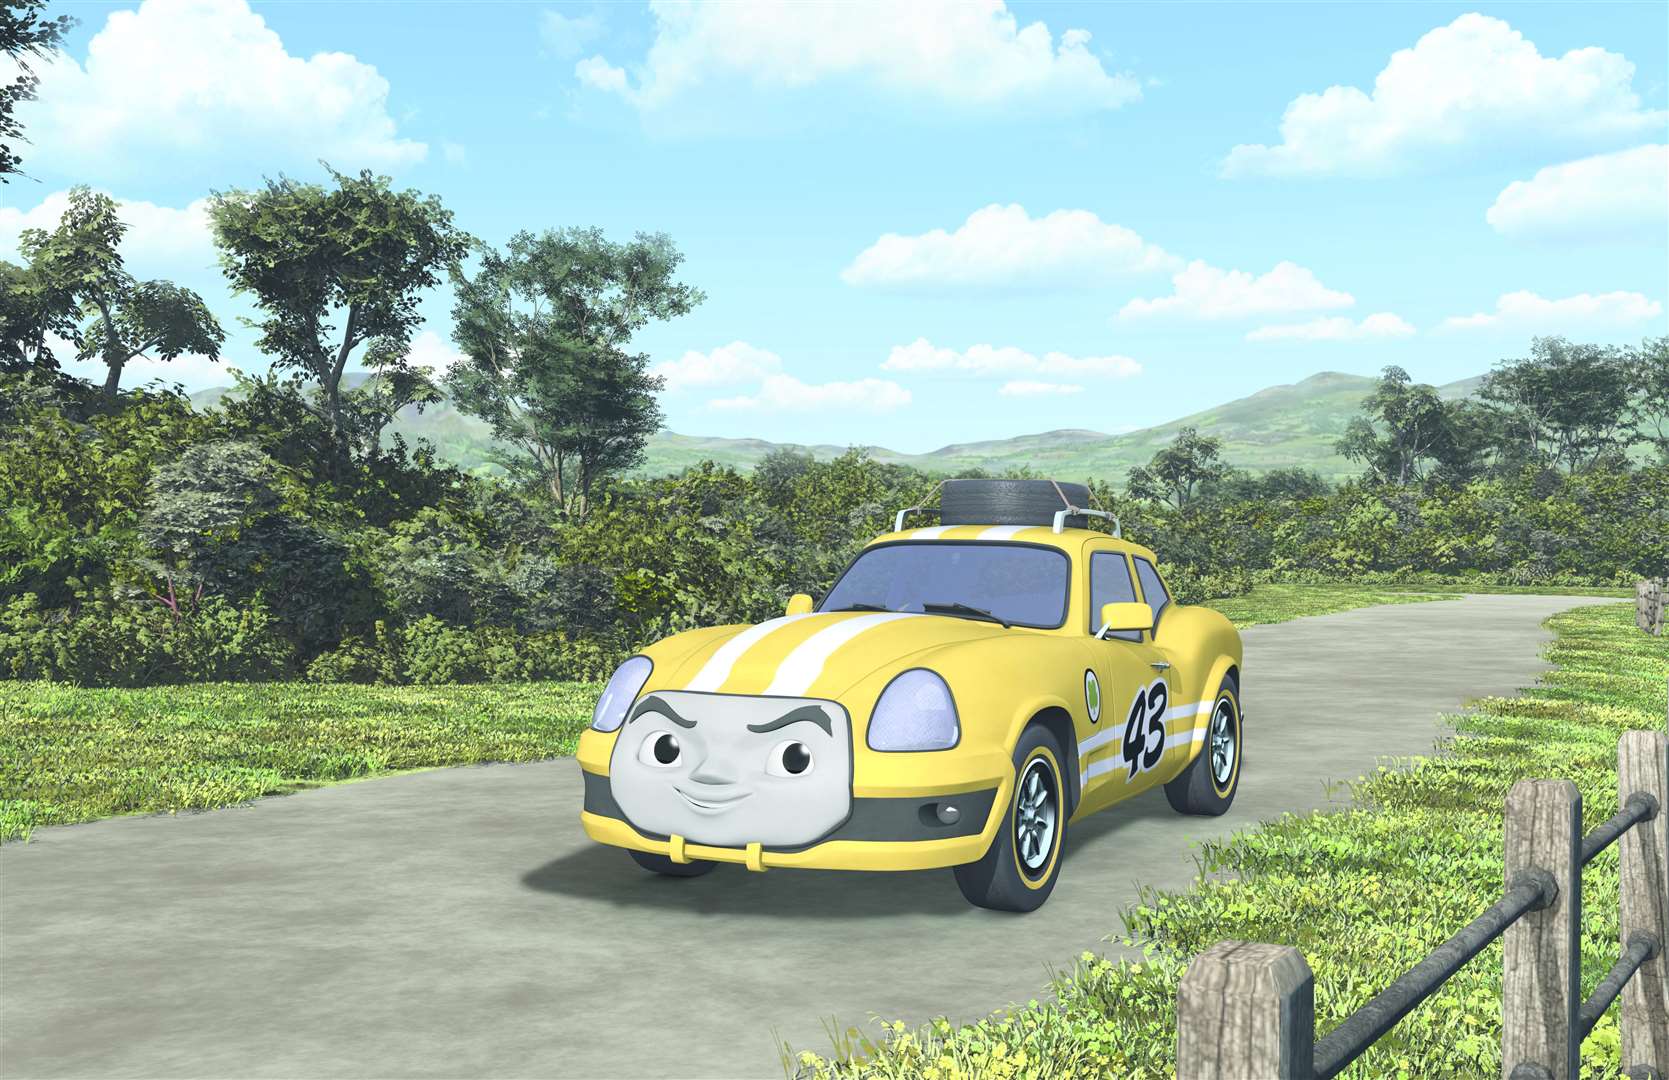 Ace the racing car is a new character in the film